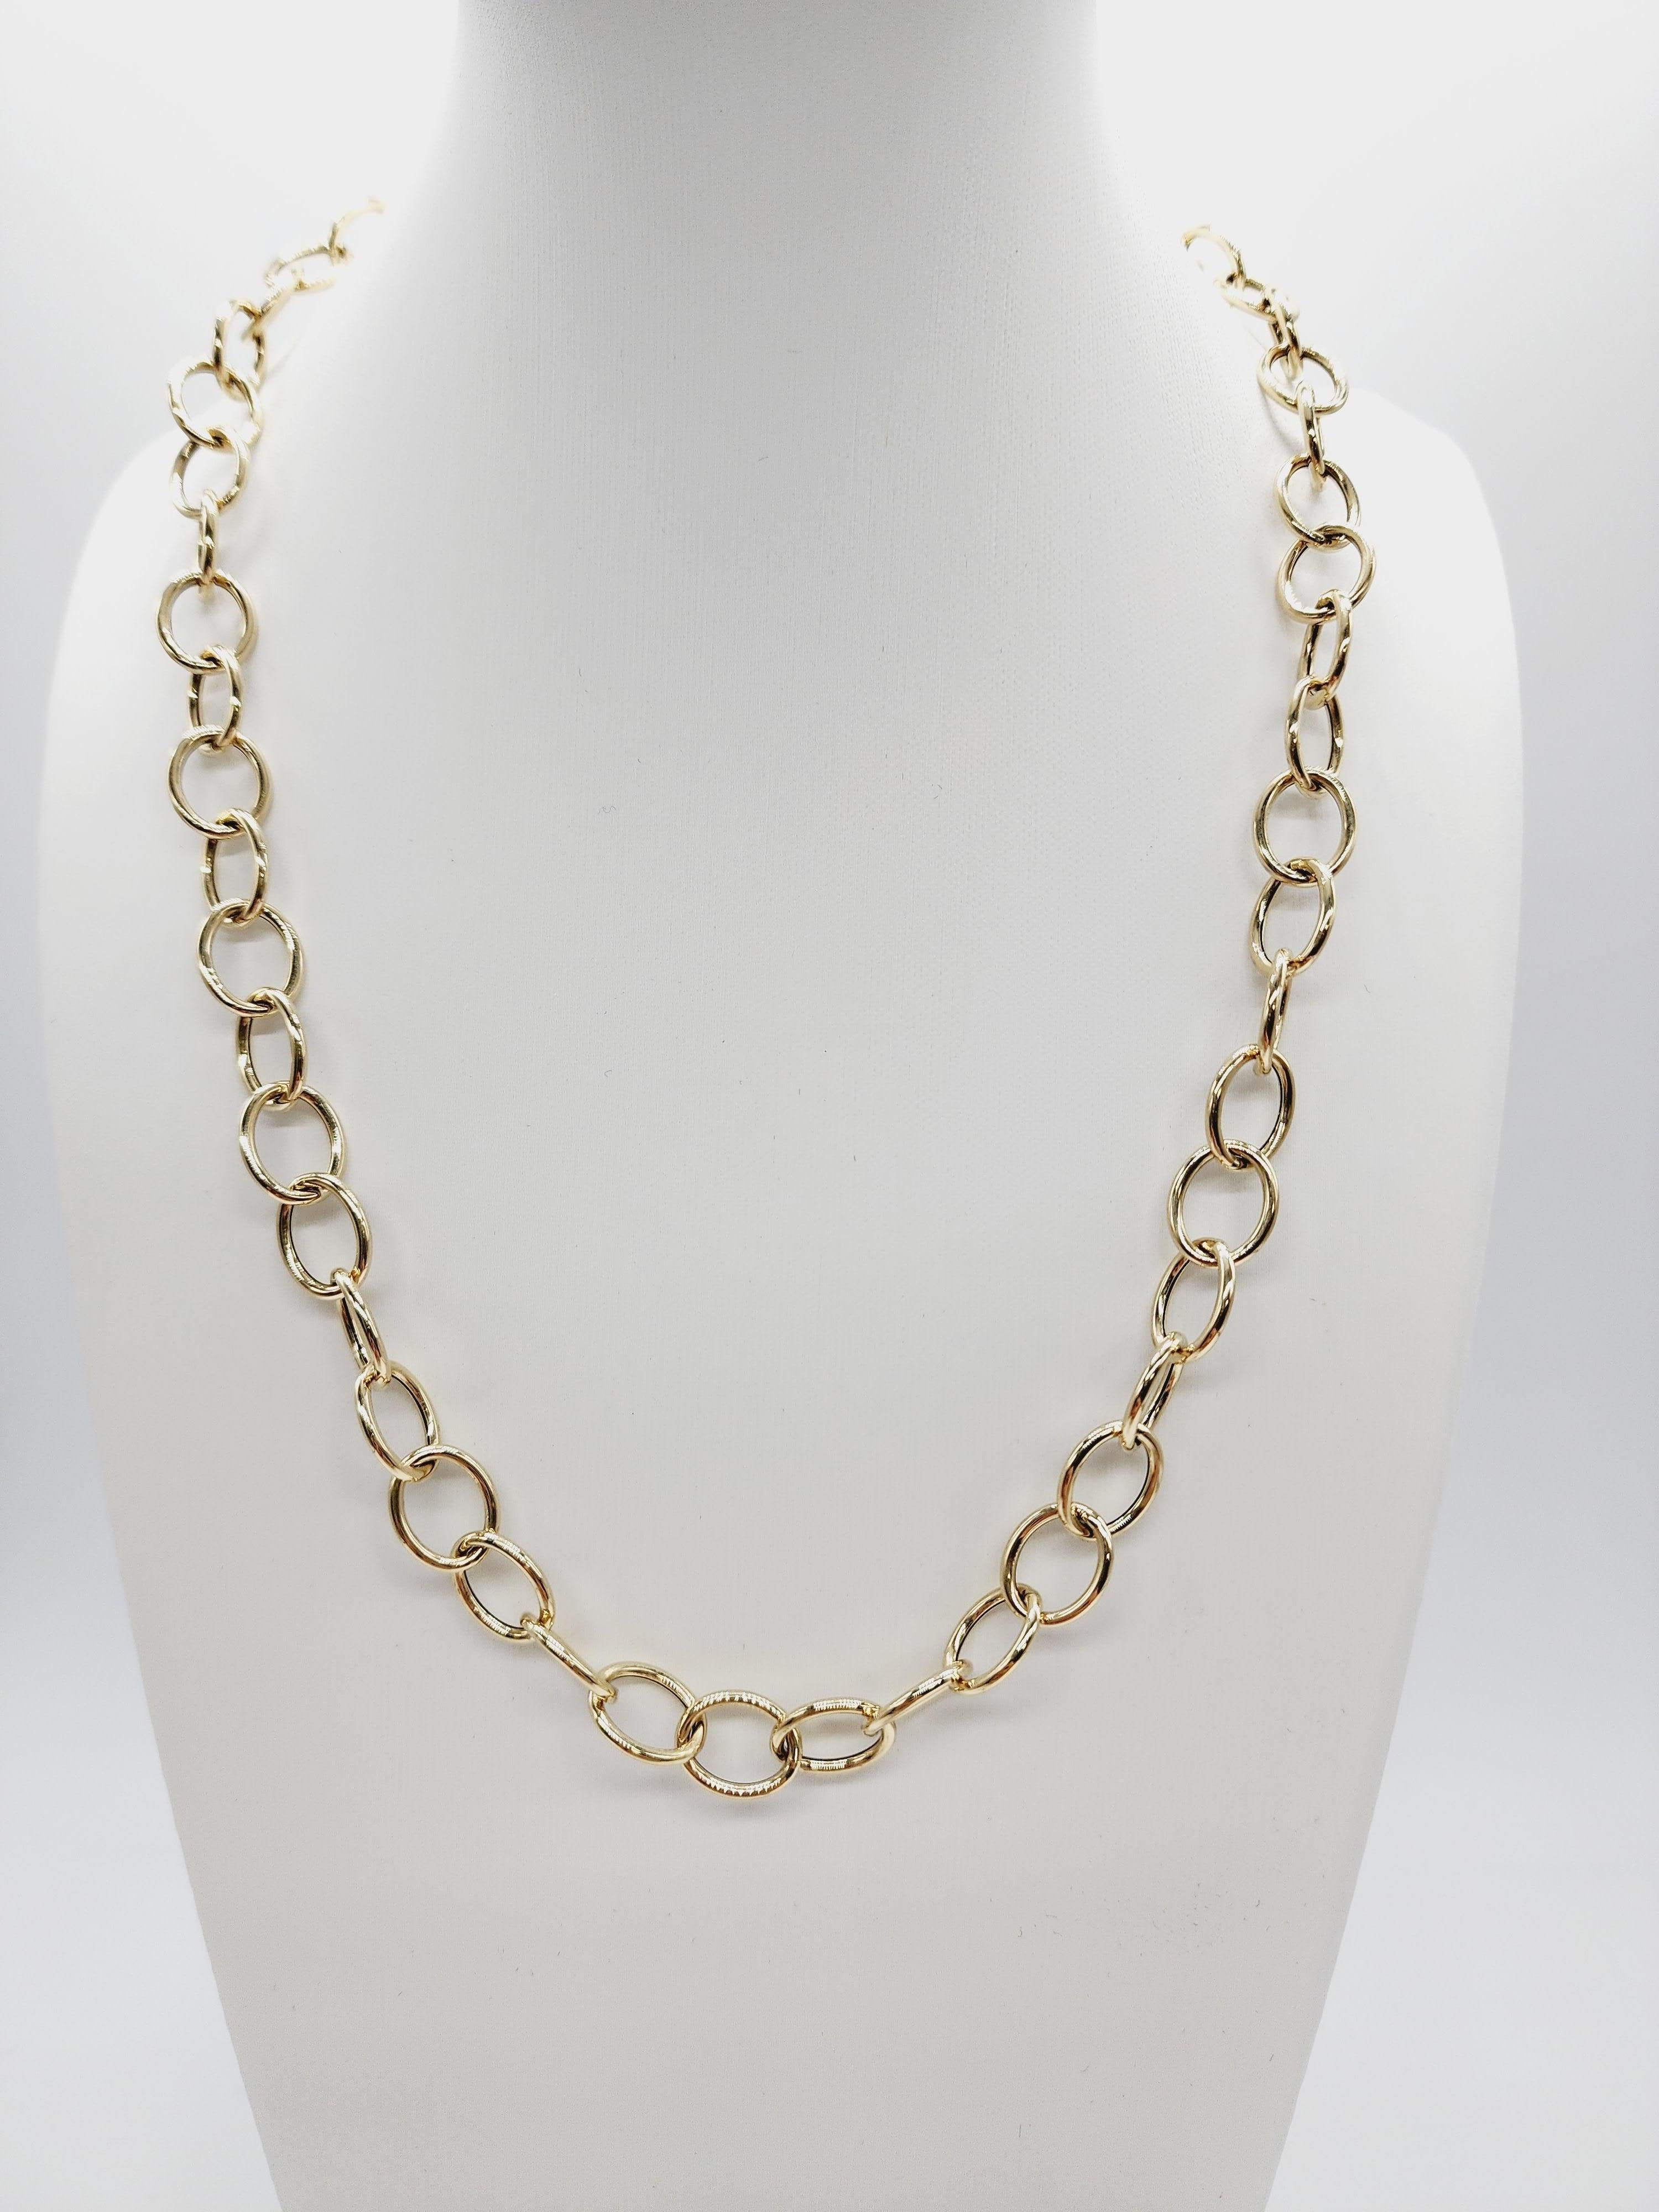 Italian made designer 18k gold link chain necklace in yellow gold. A modern, edgy, and timeless necklace chain.

Links: Approx. 9.5 mm wide
Weight: 18'' length is approx. 7.85 grams
Hollow Yellow Chain 18K Yellow Gold. 
Light weight easy to wear.